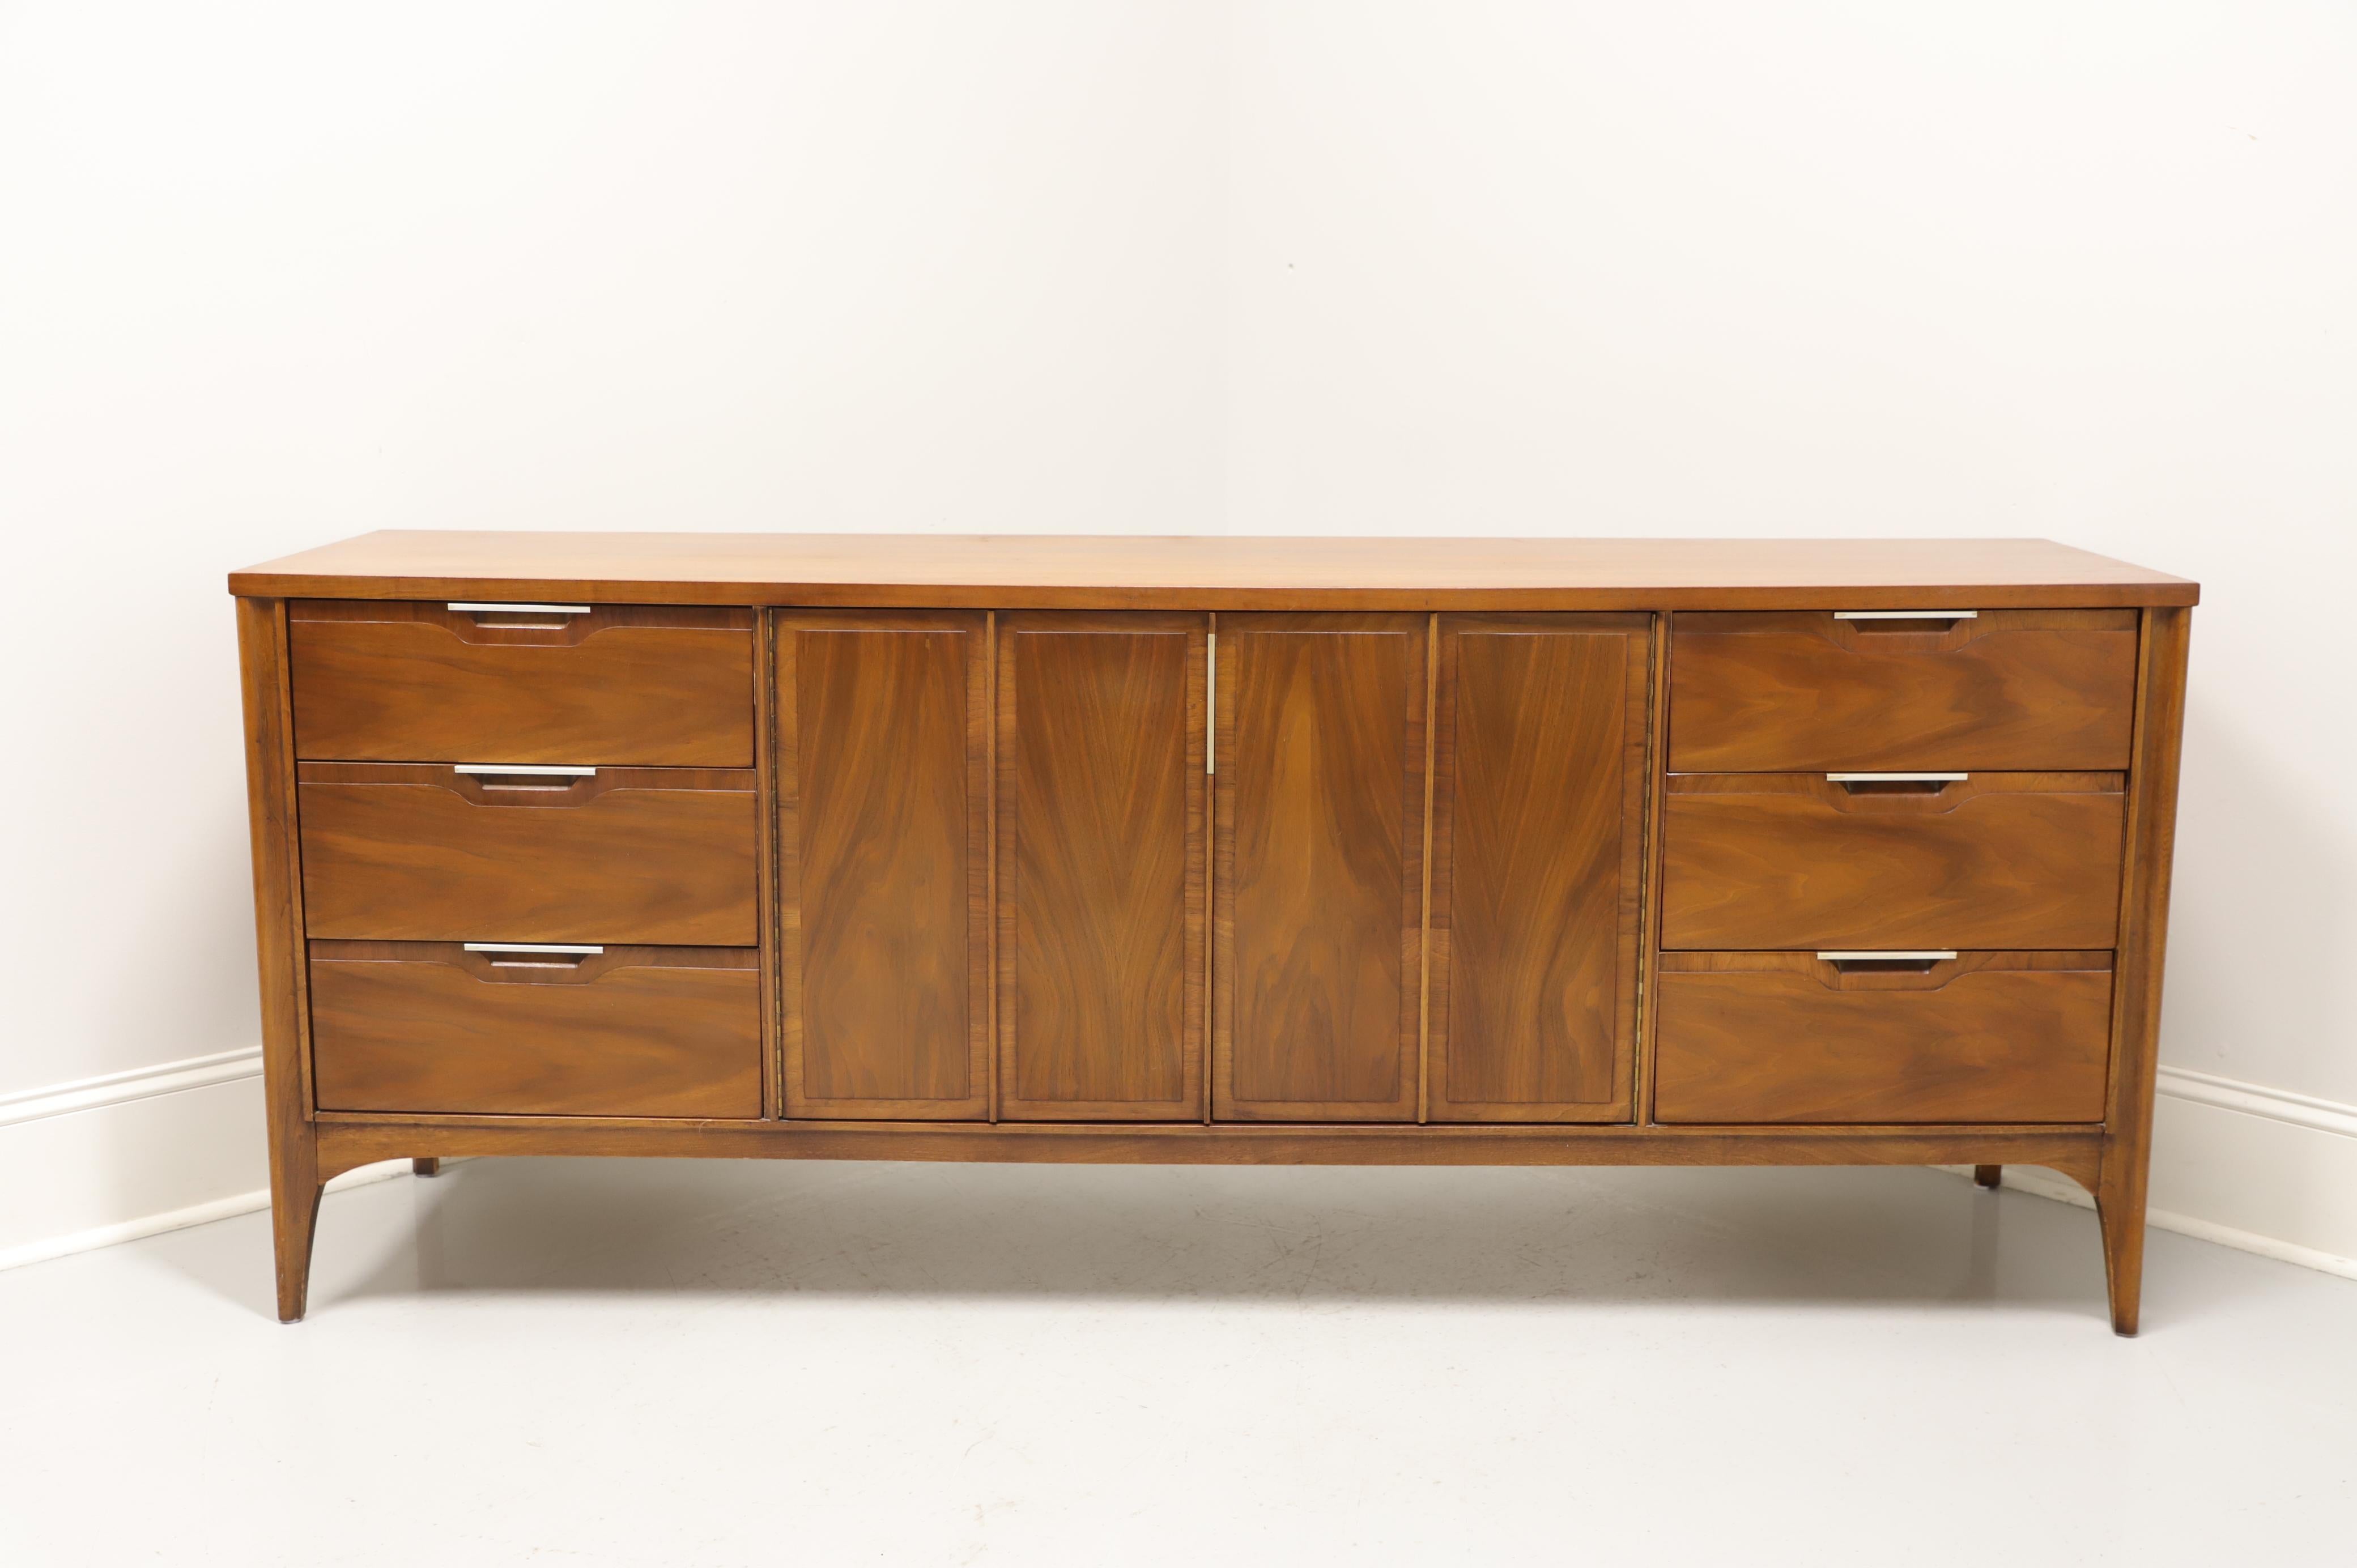 A Mid-Century Modern dresser by Kent Coffey, of Lenoir, North Carolina, USA, from their Impact line. Mahogany with brass hardware. Features right and left side with three drawers of dovetail construction. Center with dual doors revealing three more